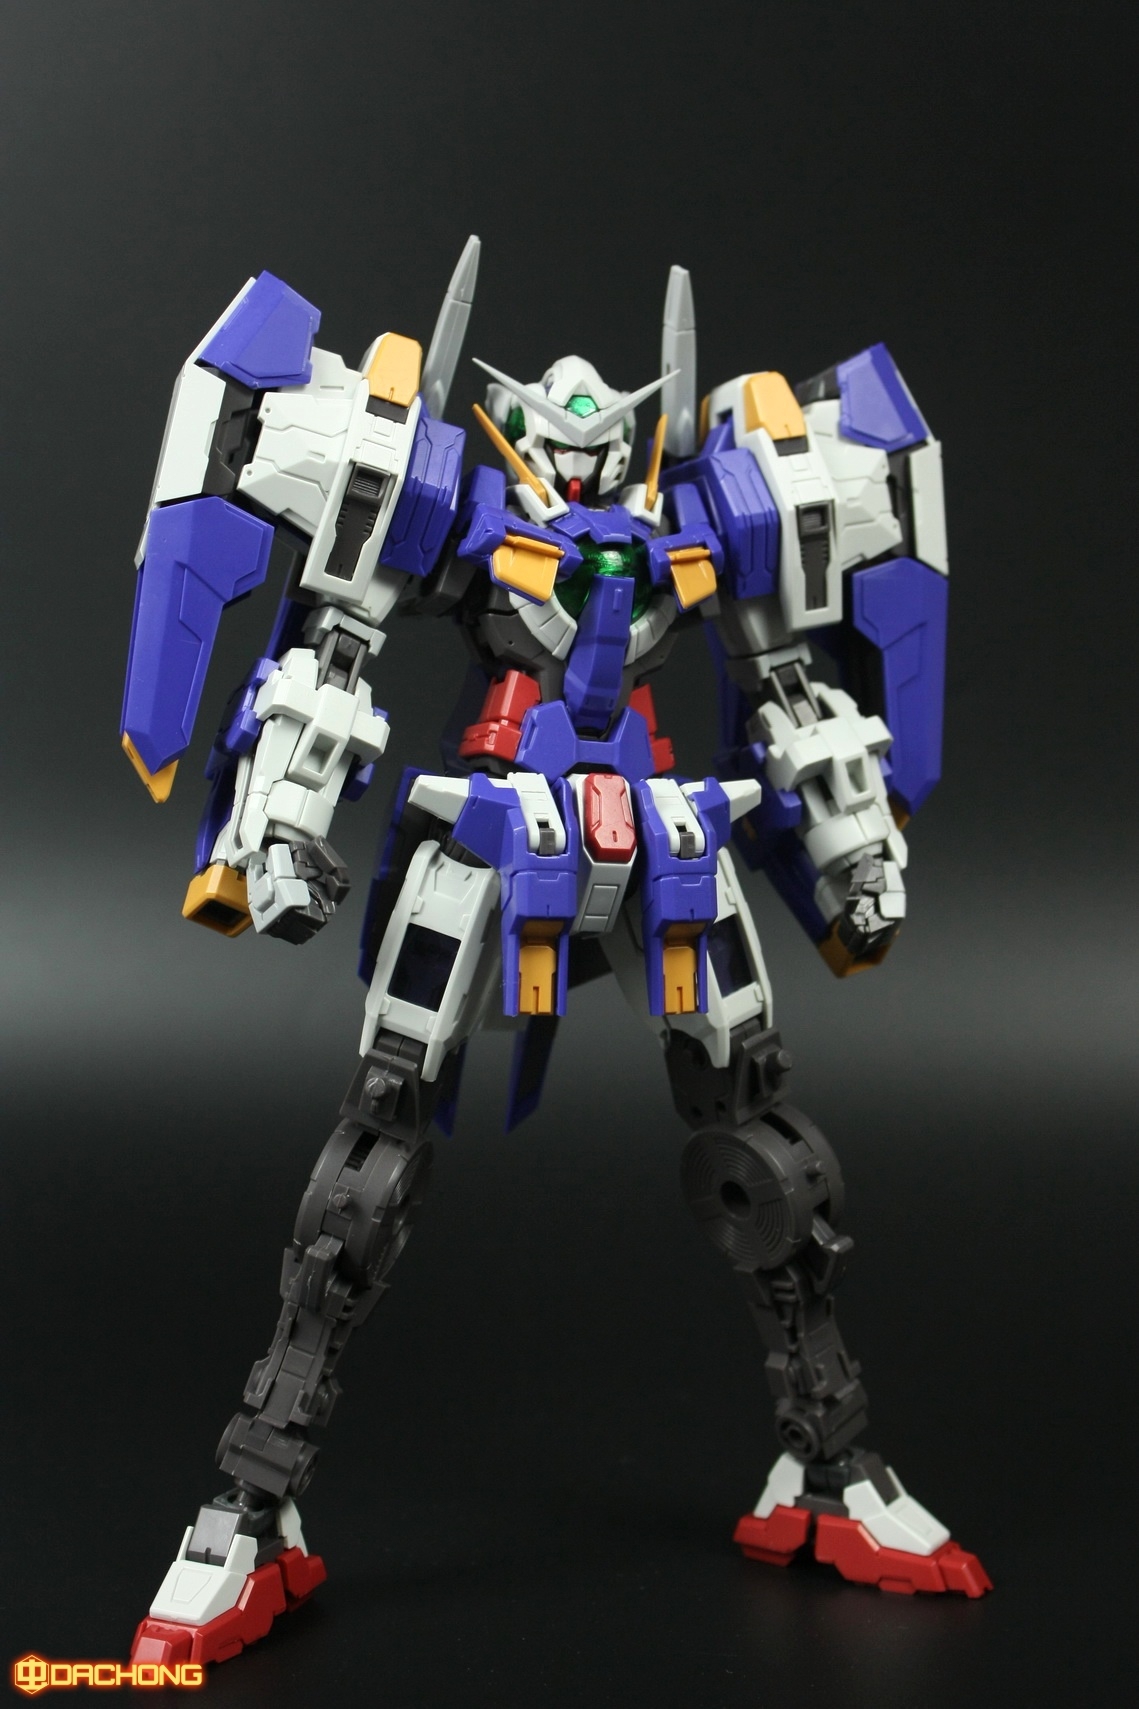 S254_MG_exia_HS_review_inask_059.jpg